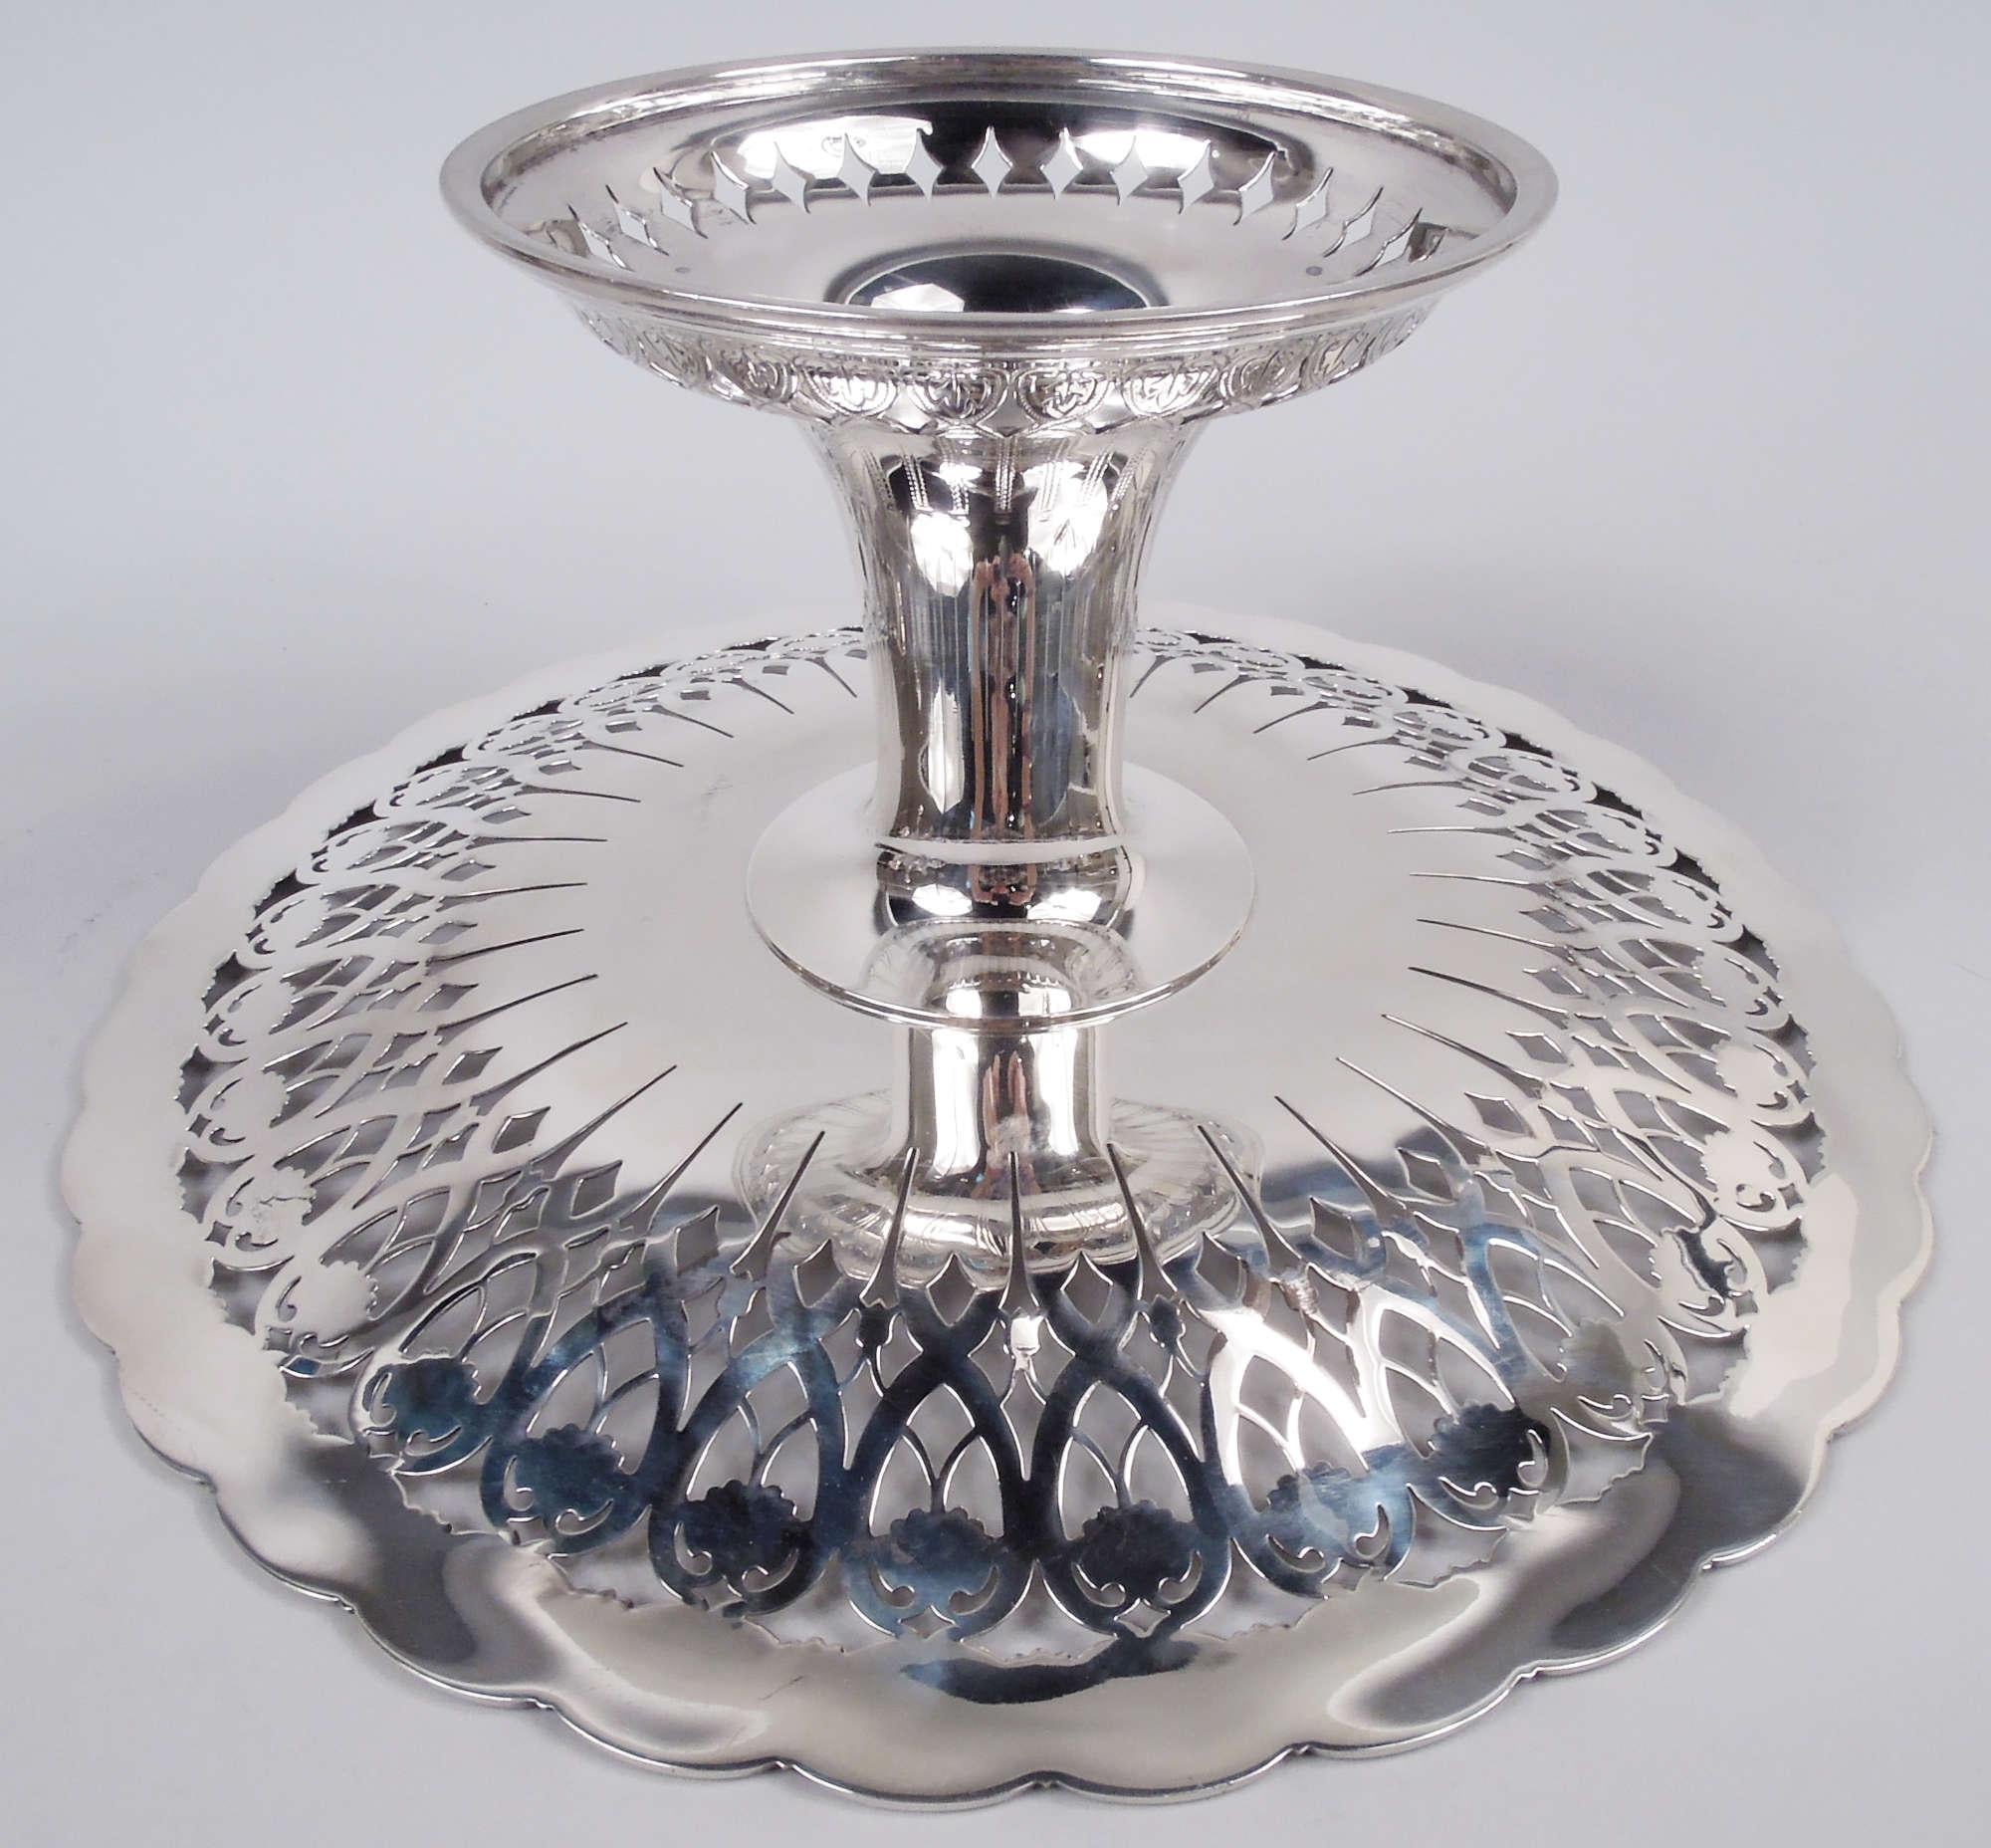 Large Tiffany American Edwardian Art Nouveau Sterling Silver Compote For Sale 3